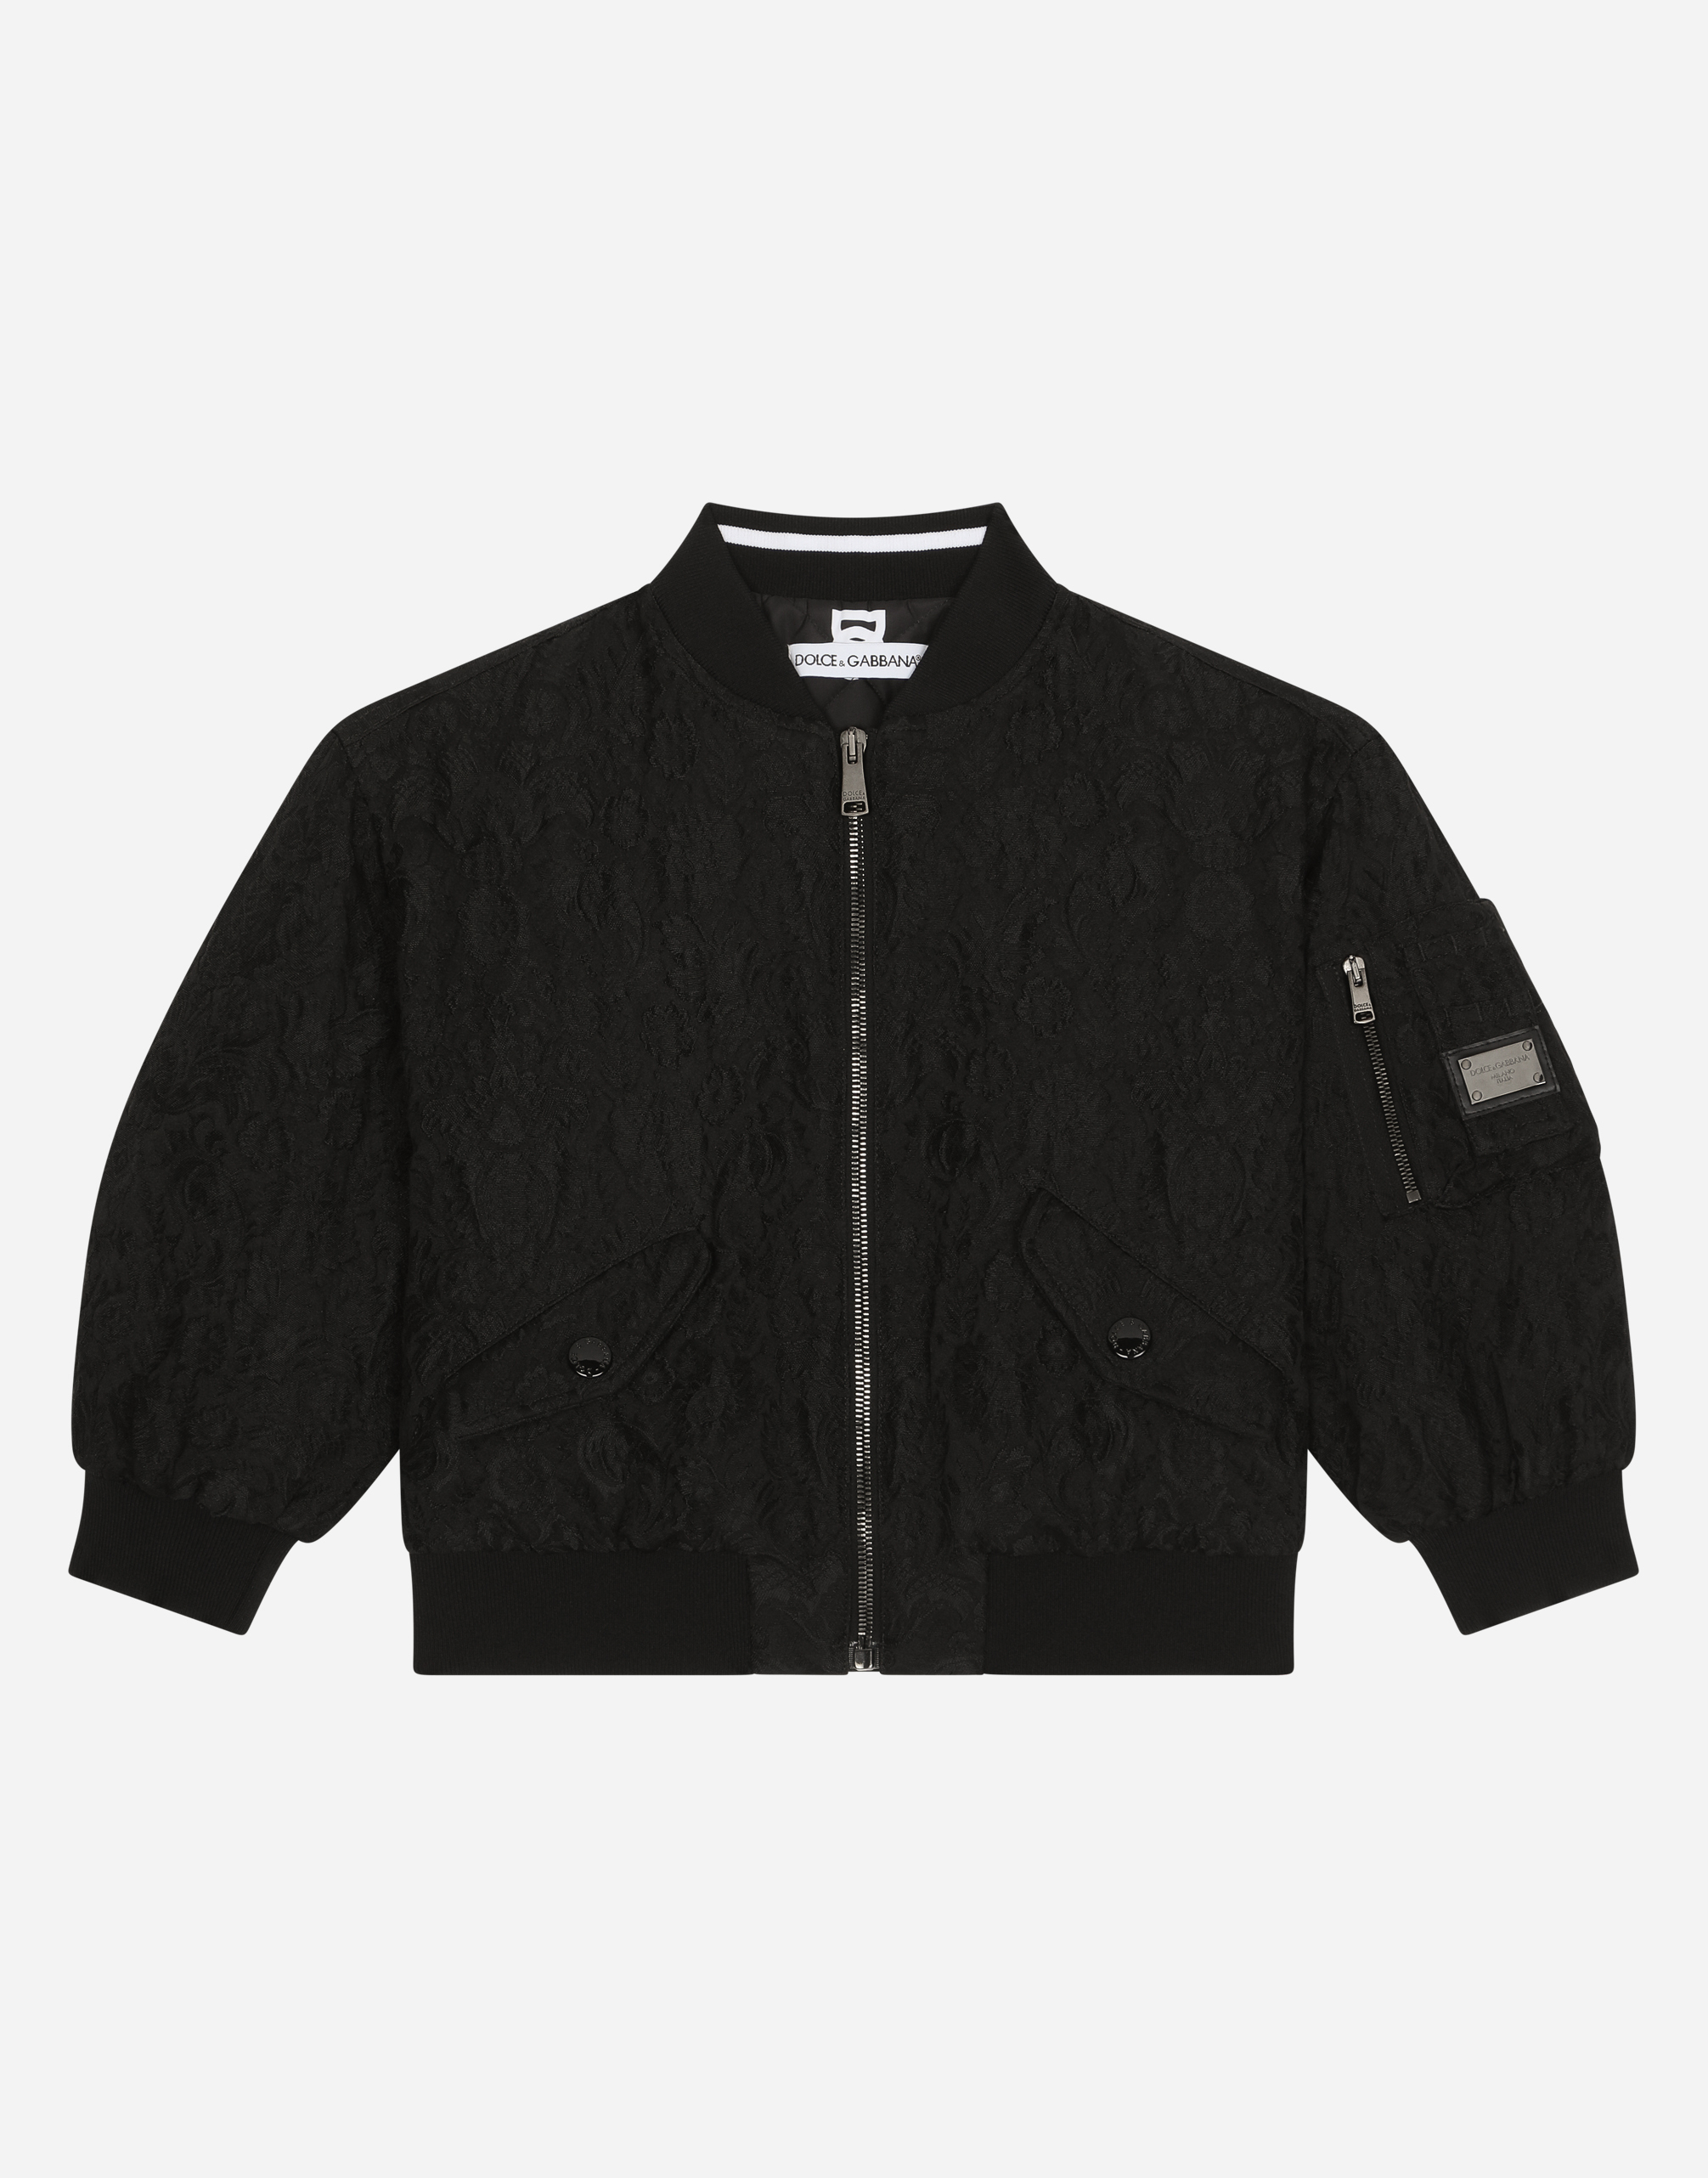 Brocade bomber jacket with logo tag in Black